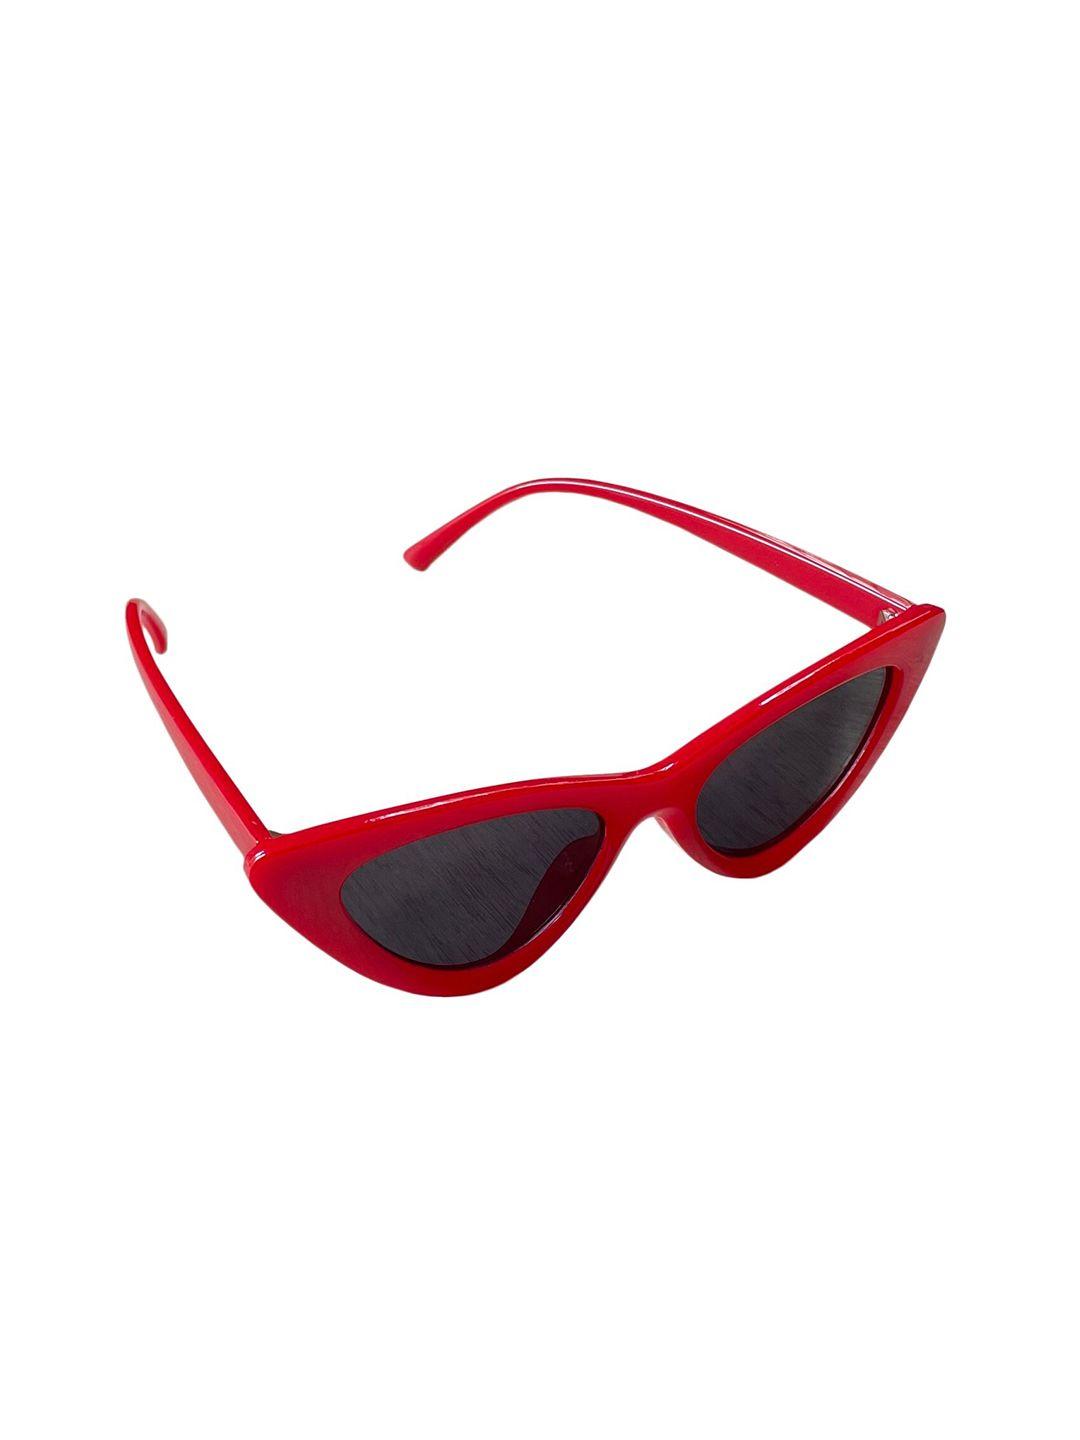 awestuffs women black lens & red cateye sunglasses with uv protected lens cedsasim0721-black